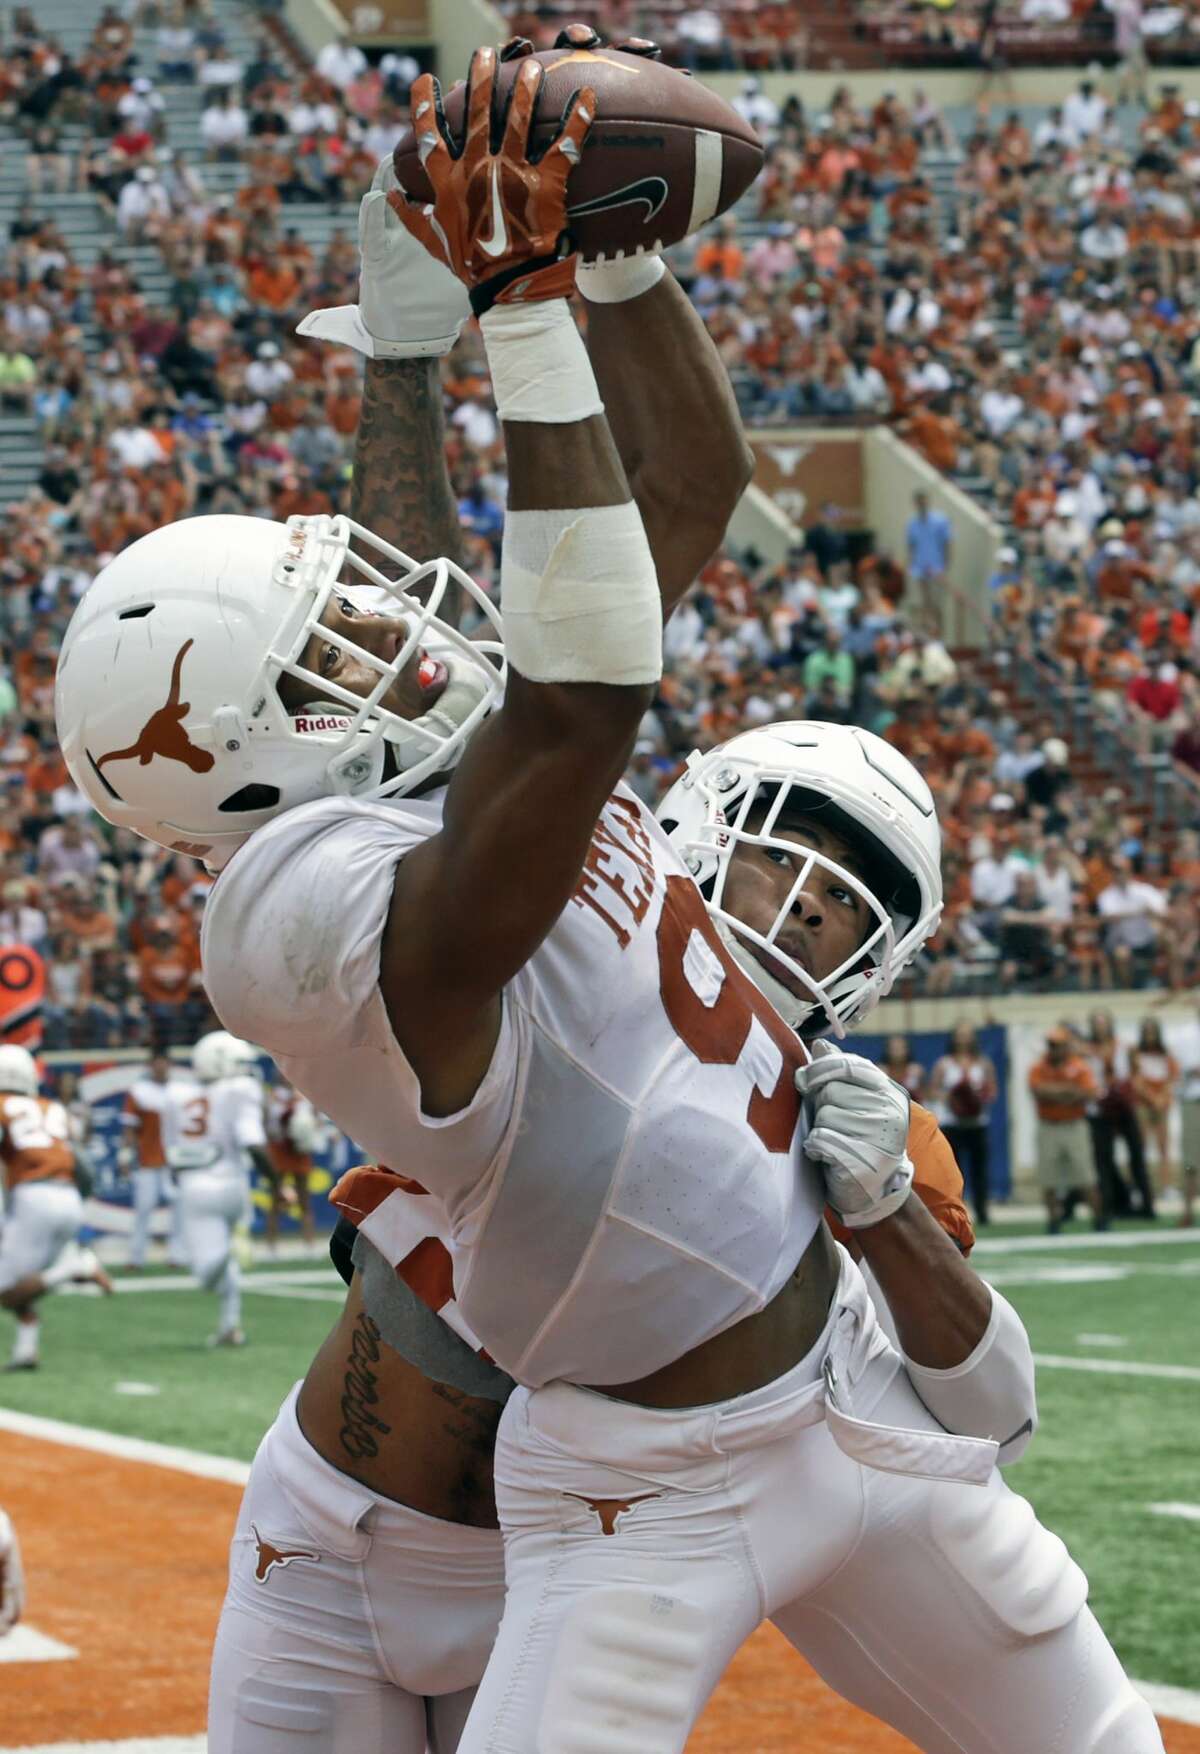 Collin Johnson snares a touchdown pass thrown by Shane Buechele over the defense of Eric Cuffee as the Texas Longhorns play their Orange-White spring game on April 15, 2017.